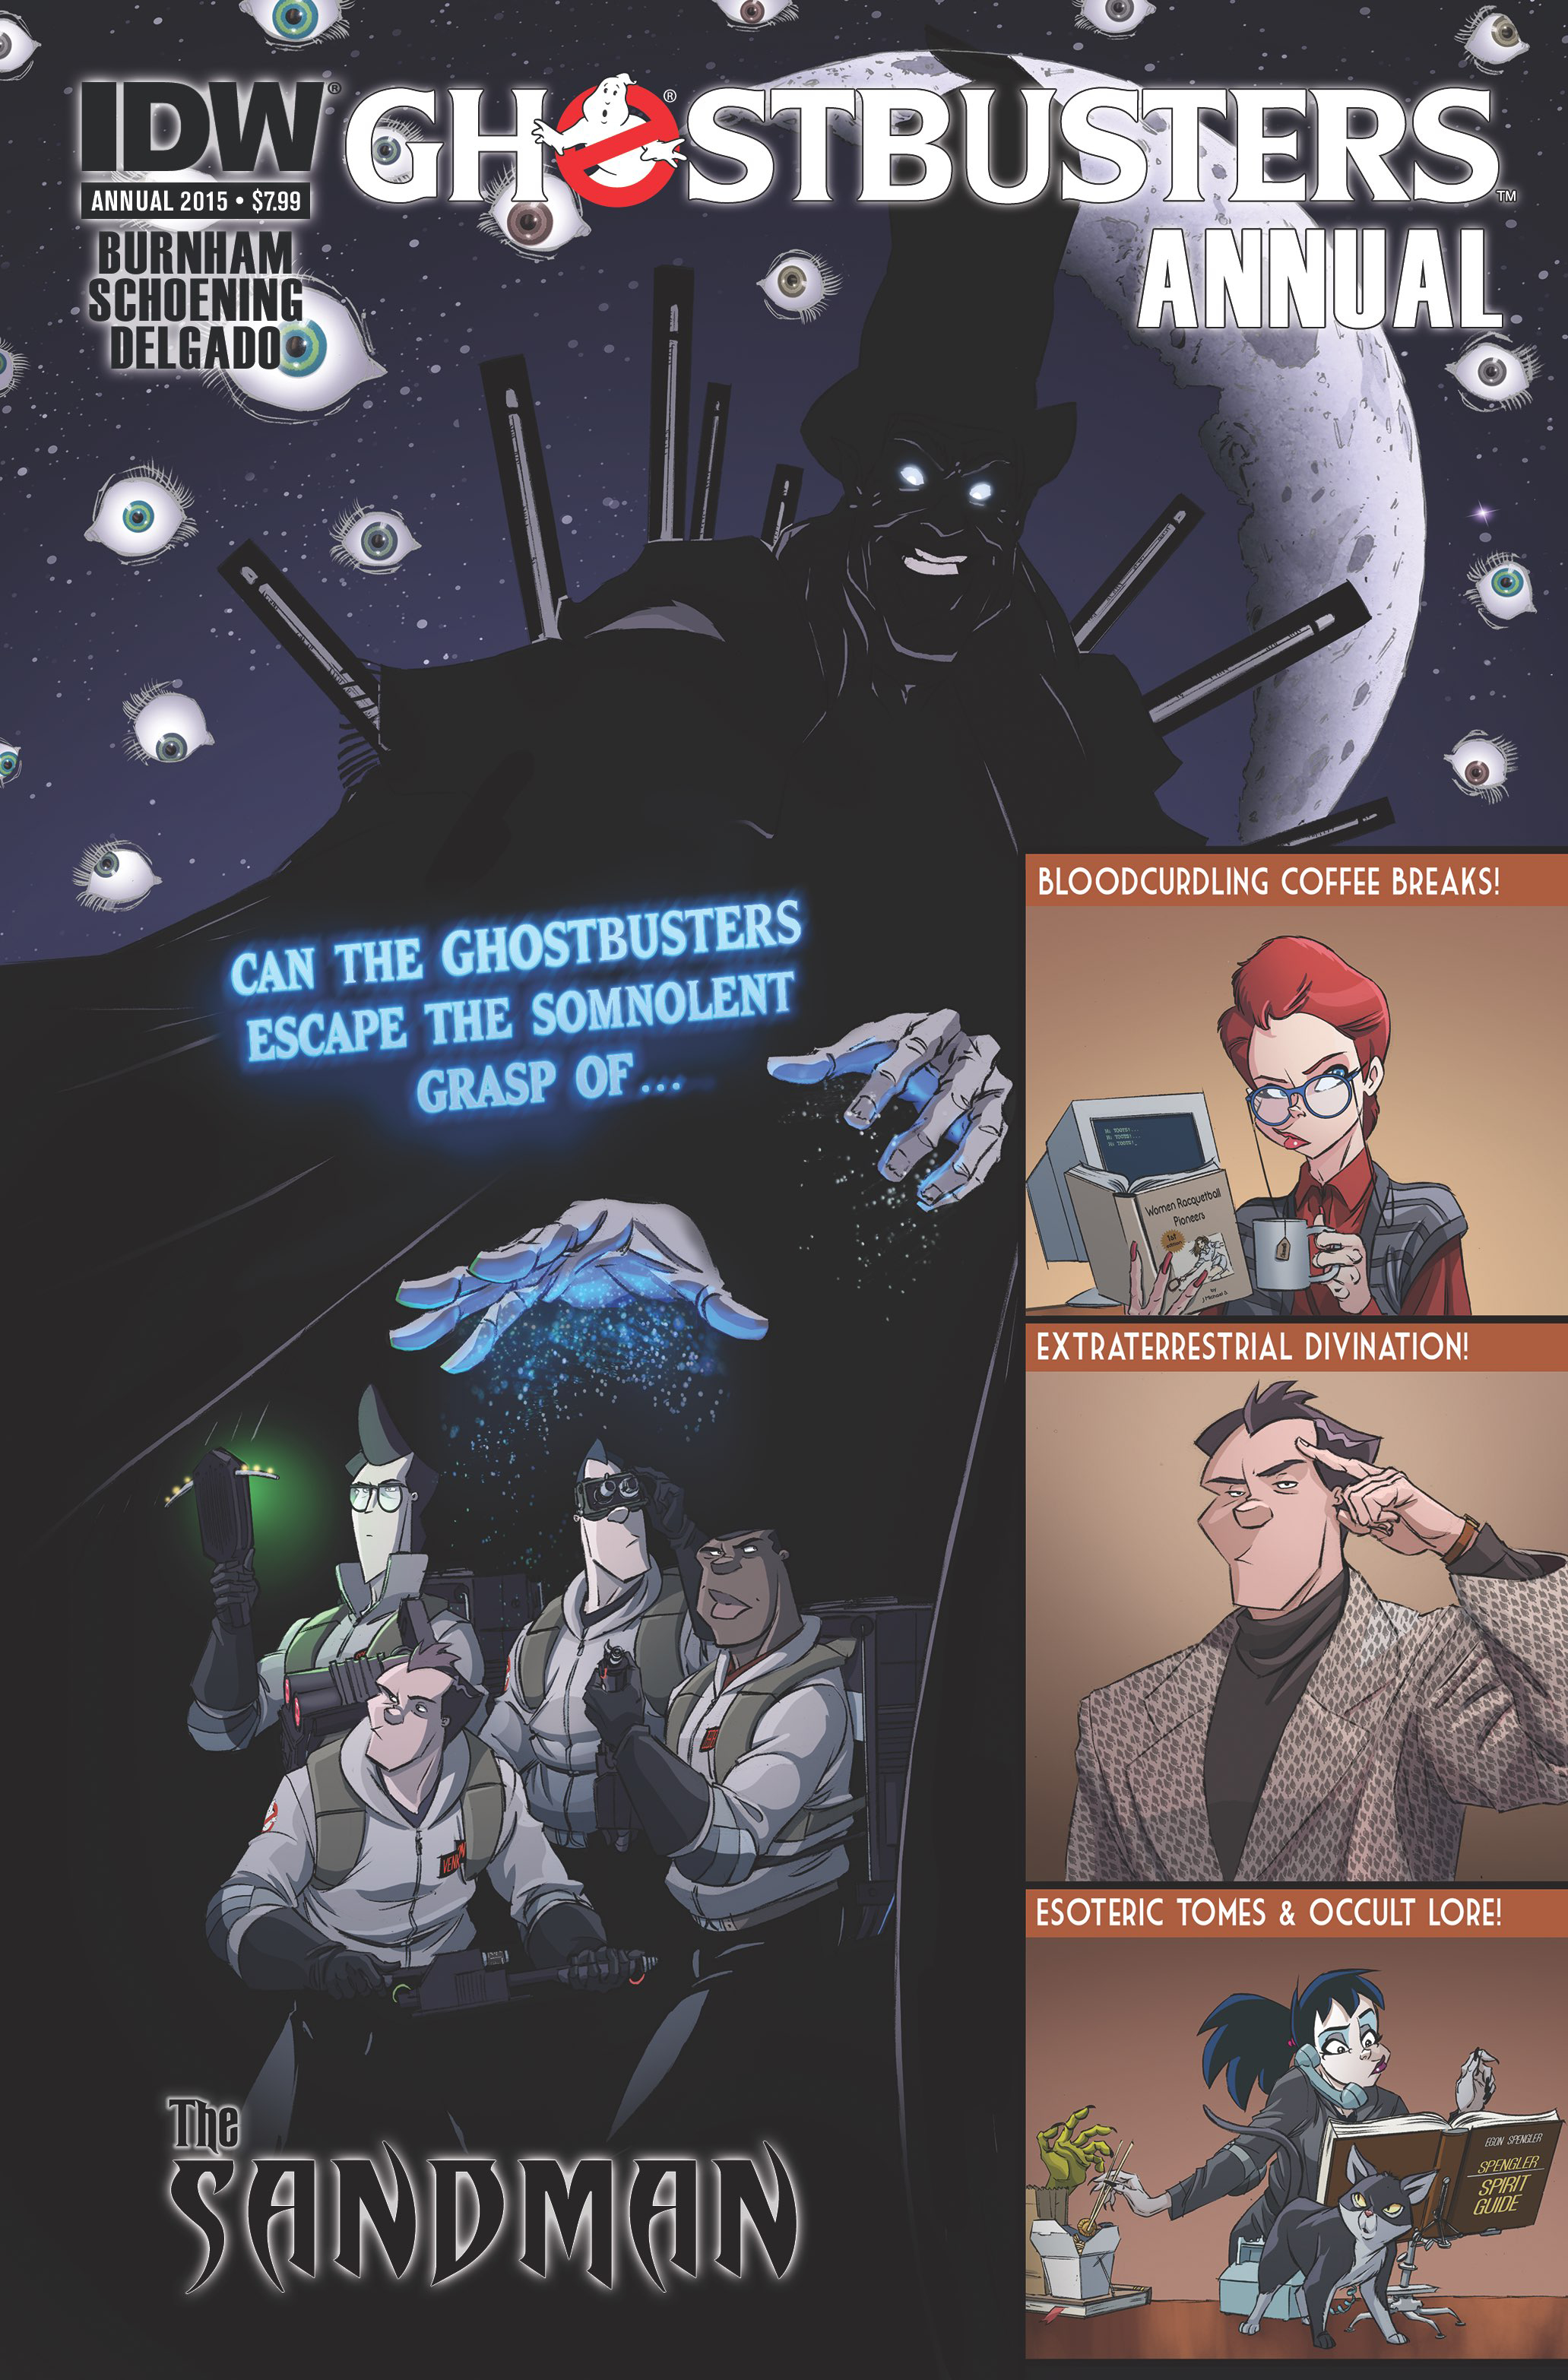 GHOSTBUSTERS ANNUAL 2015